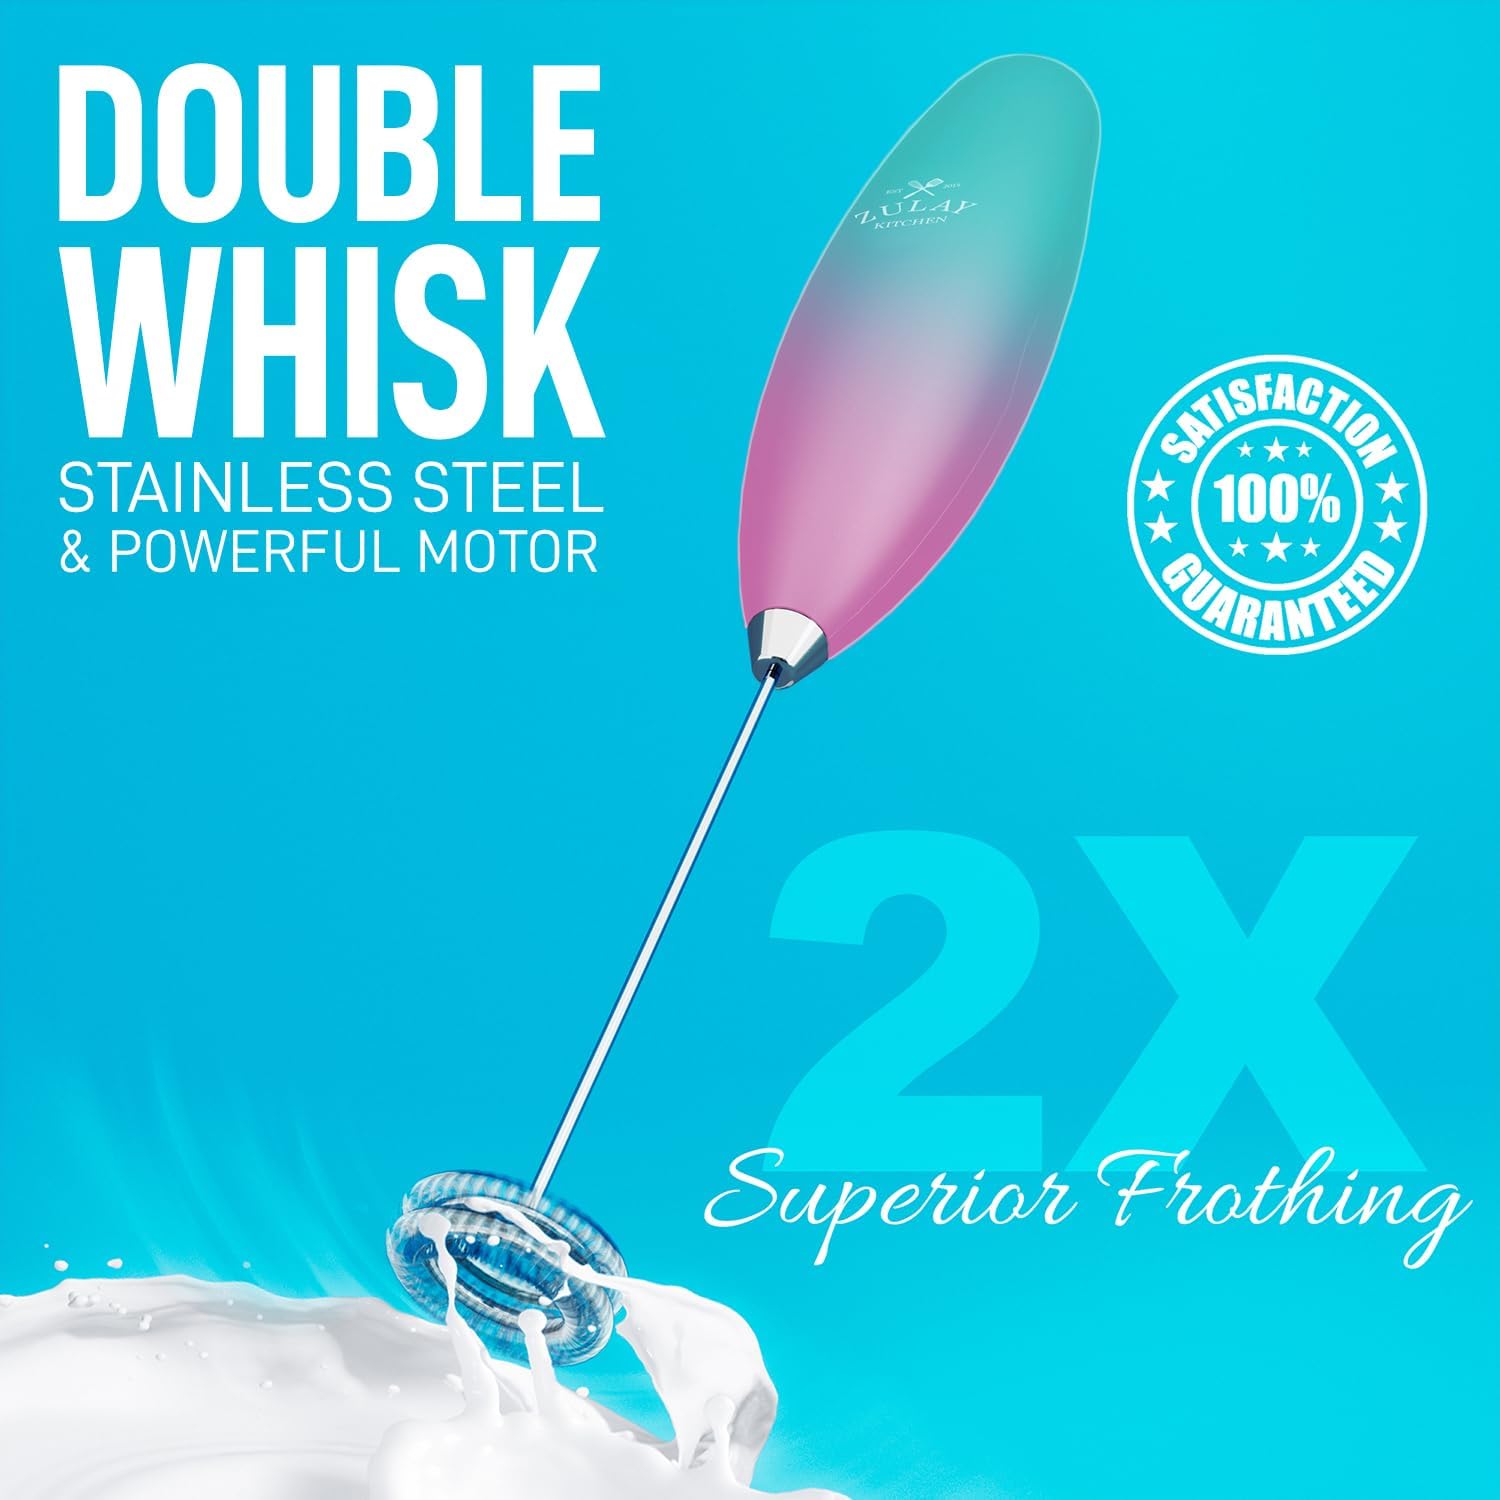 Double whisk stainless steel with powerful motor